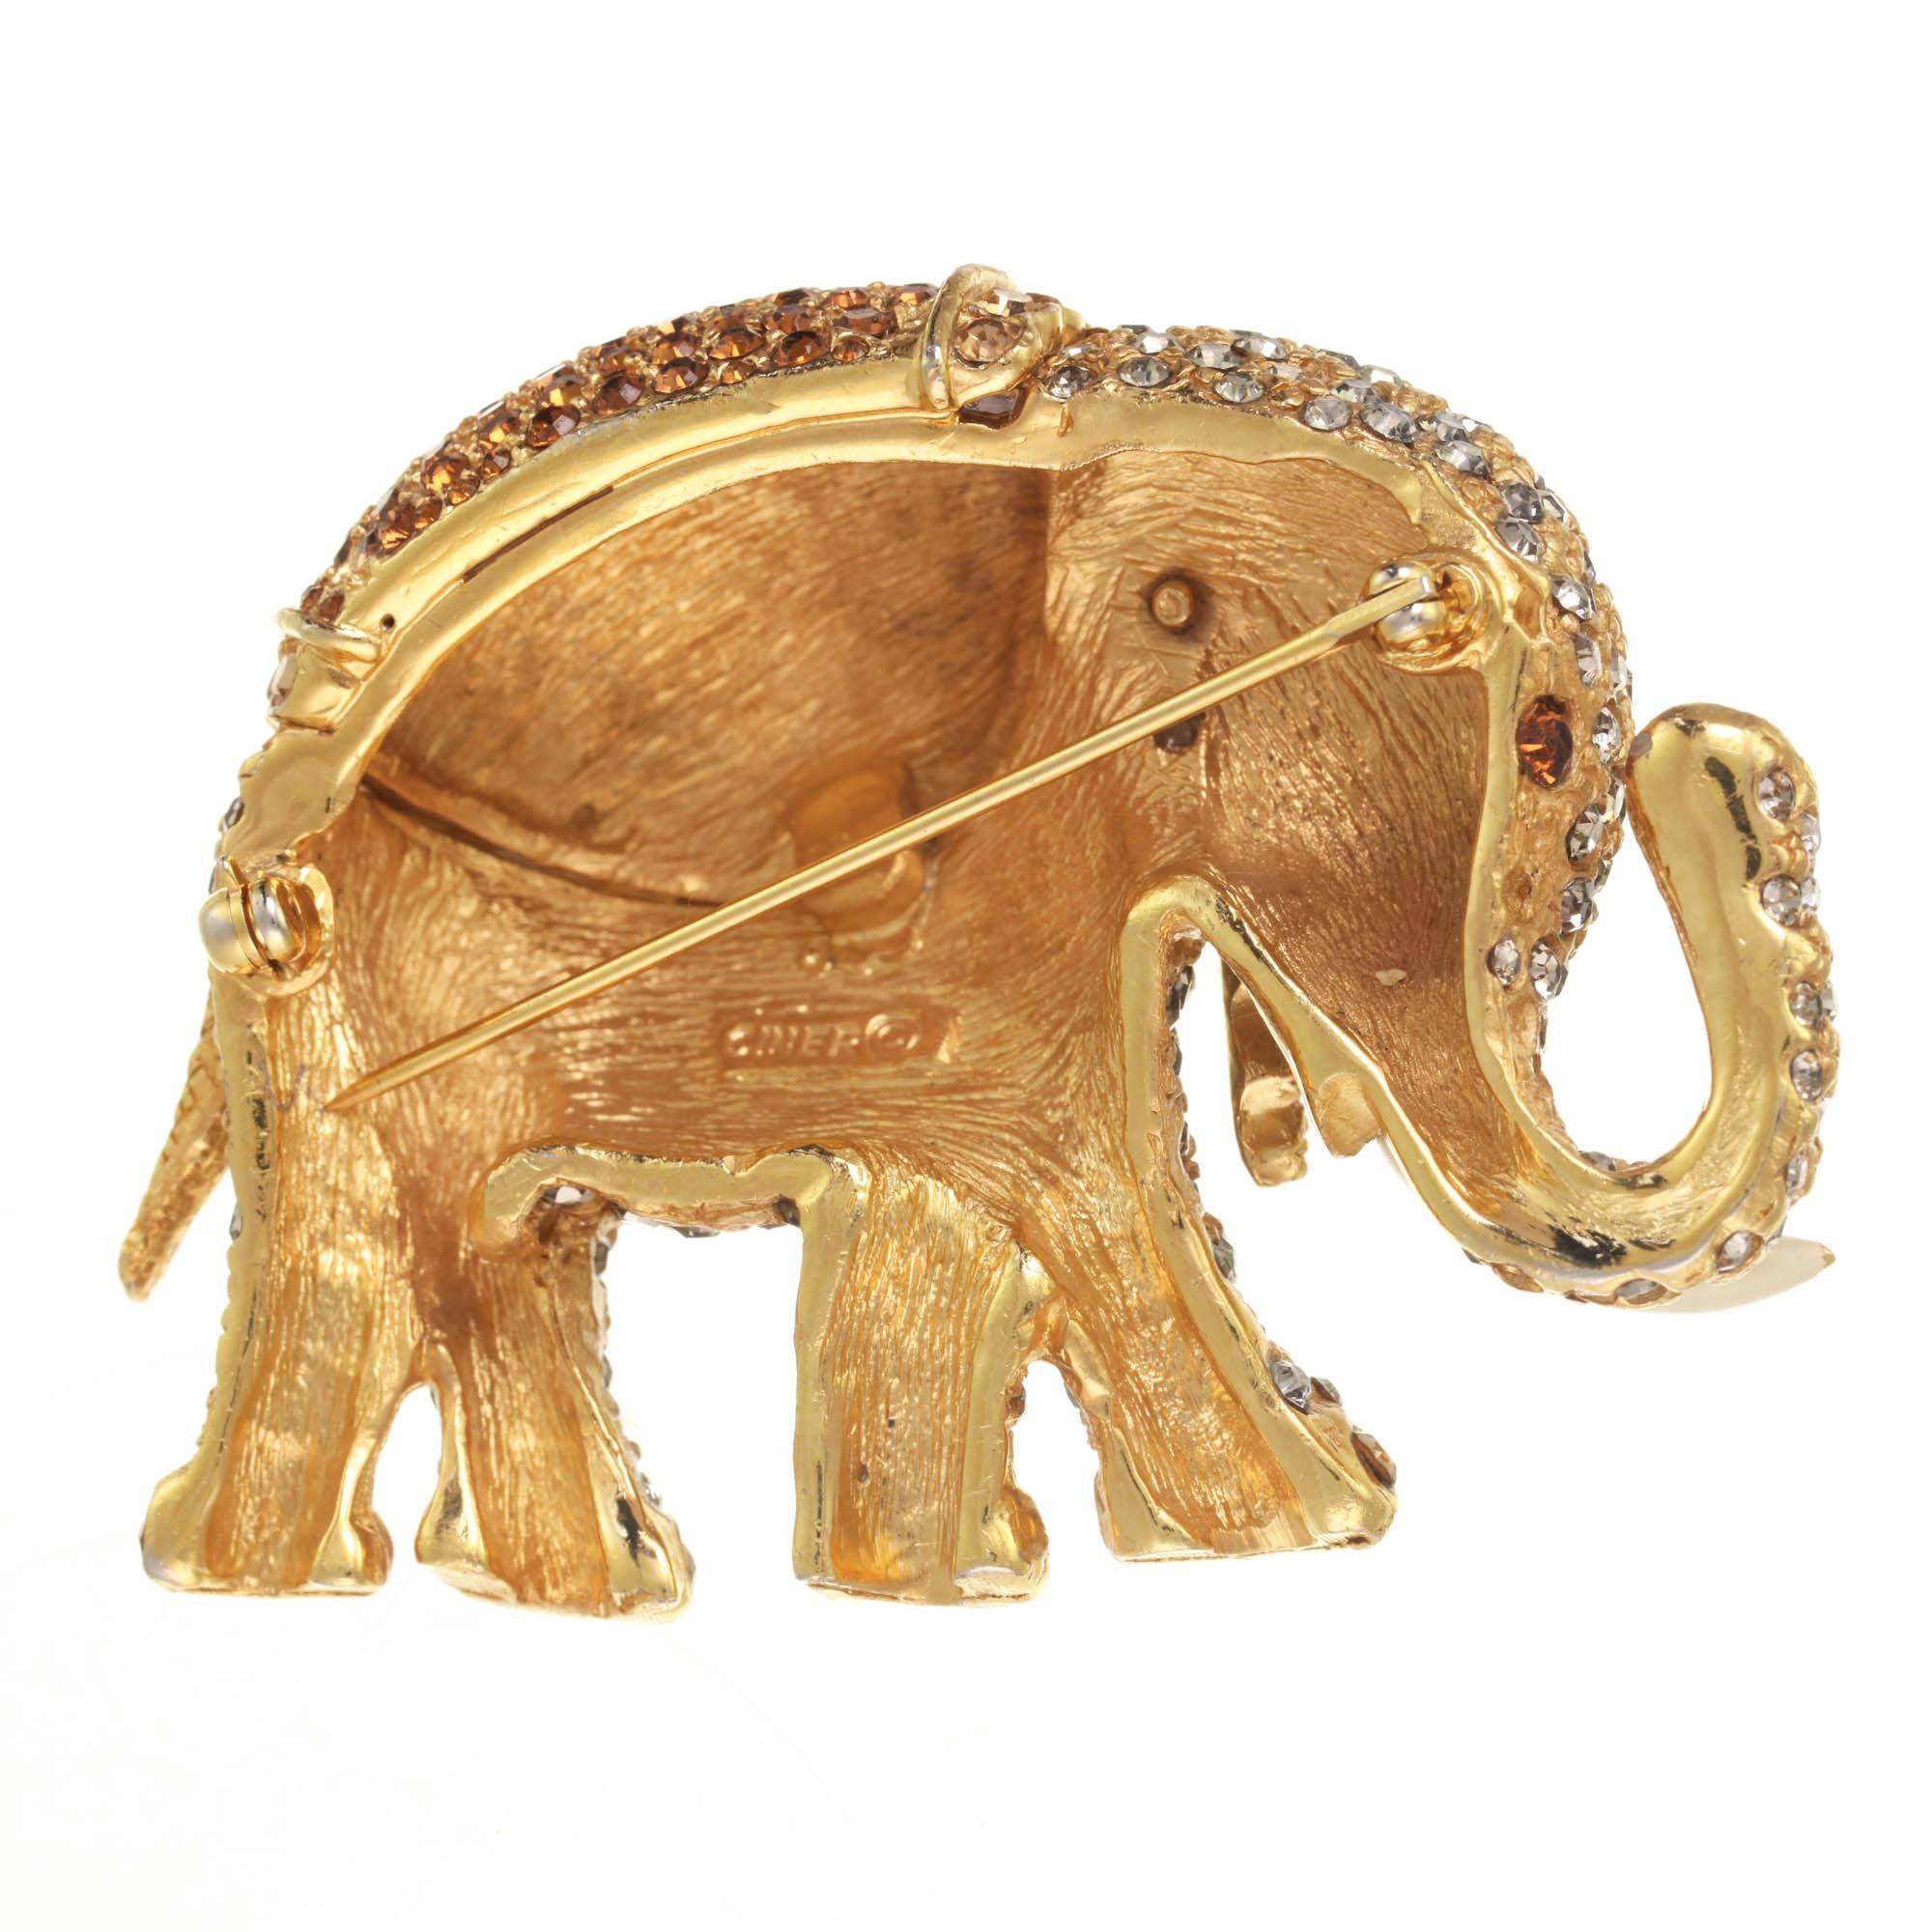 Trunks up! This large gold elephant is adorned with black diamond, light colorado topaz, and smoked topaz rhinestones, creating a vintage look and feel. With a hand applied ivory enameled trunk, this elephant brooch will be passed down for